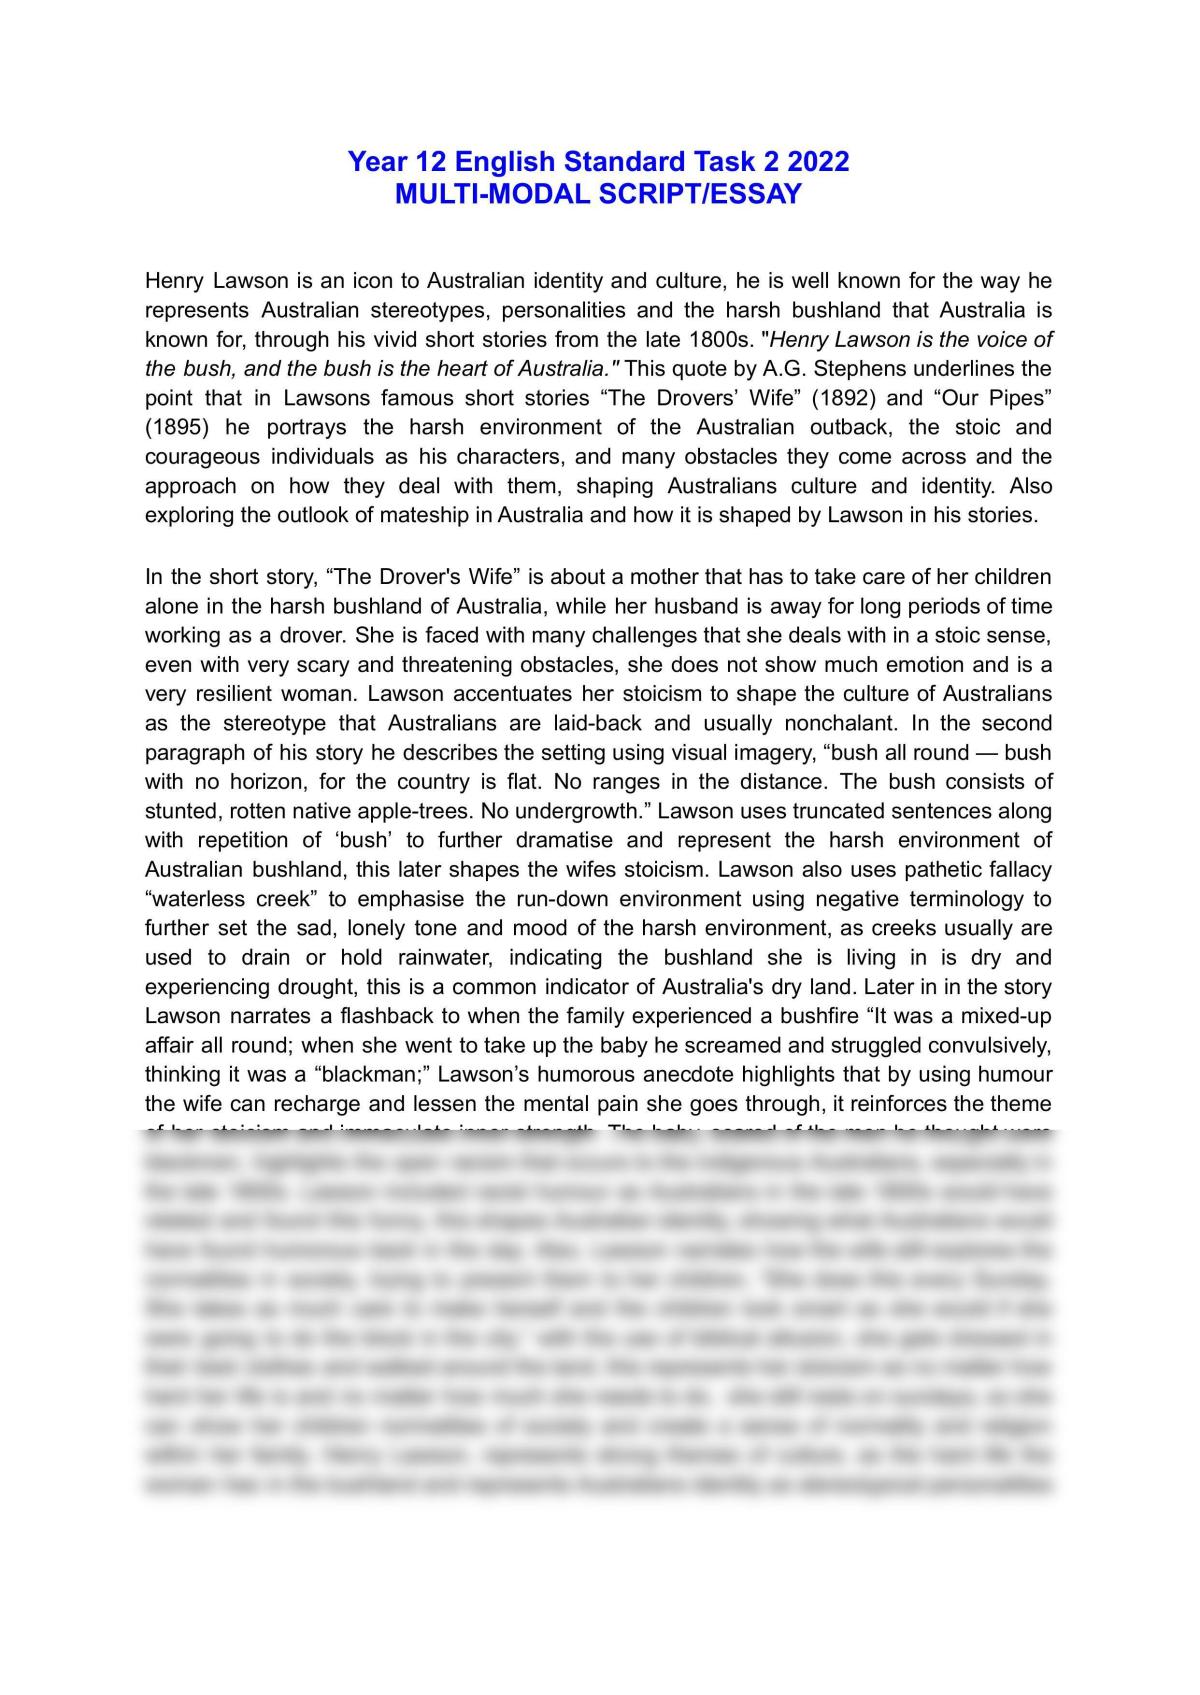 Henry lawson essay year 12 - Page 1